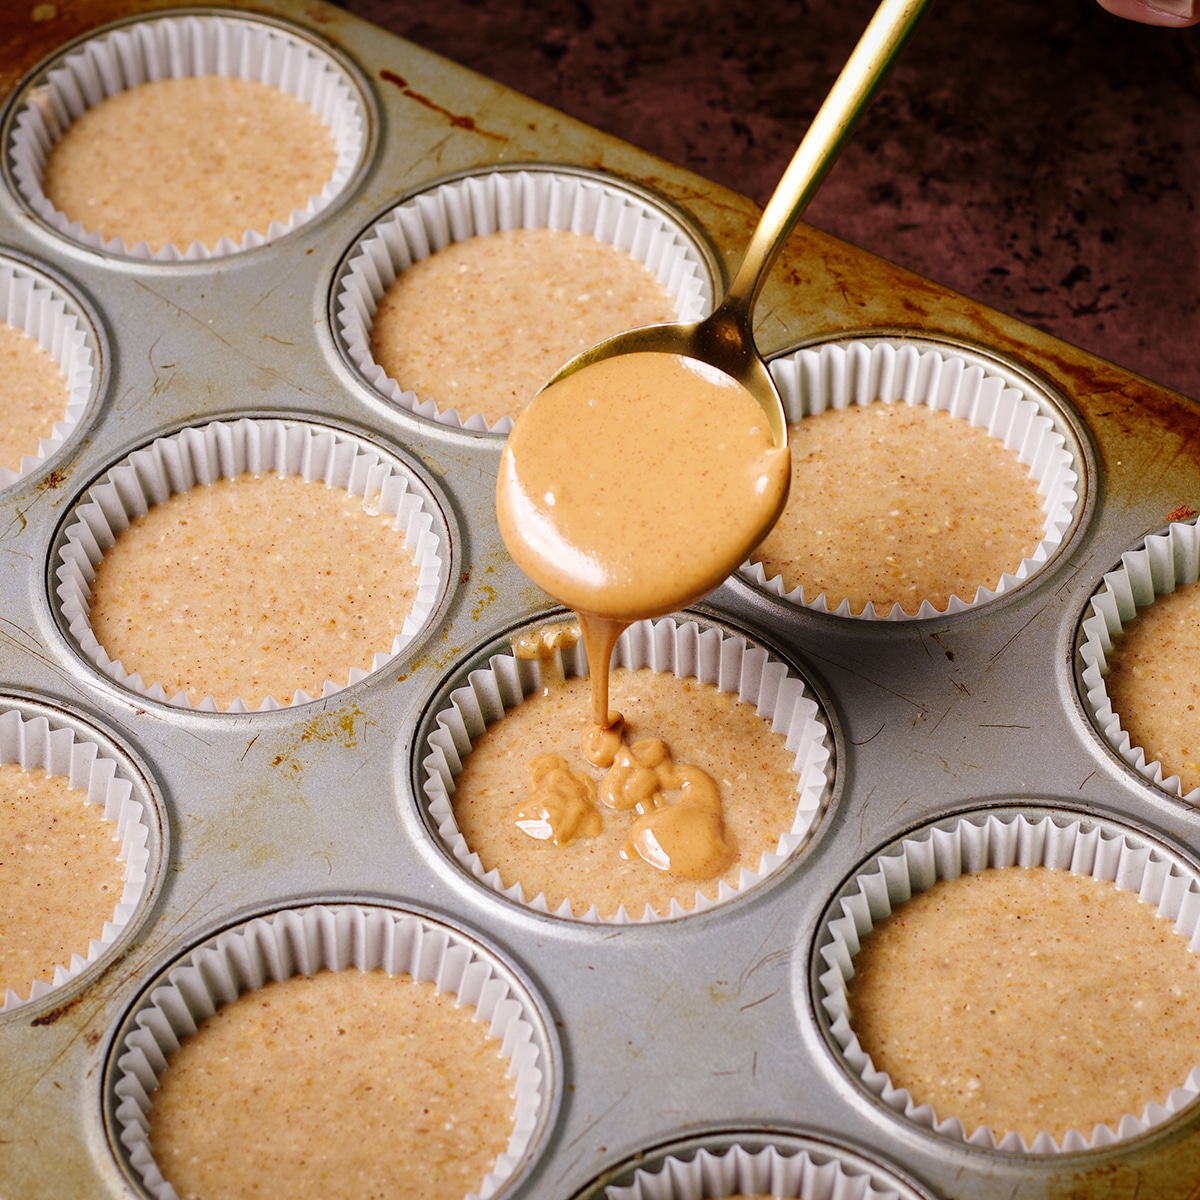 Someone using a gold spoon to drizzle melted peanut butter over gluten free banana muffin batter.